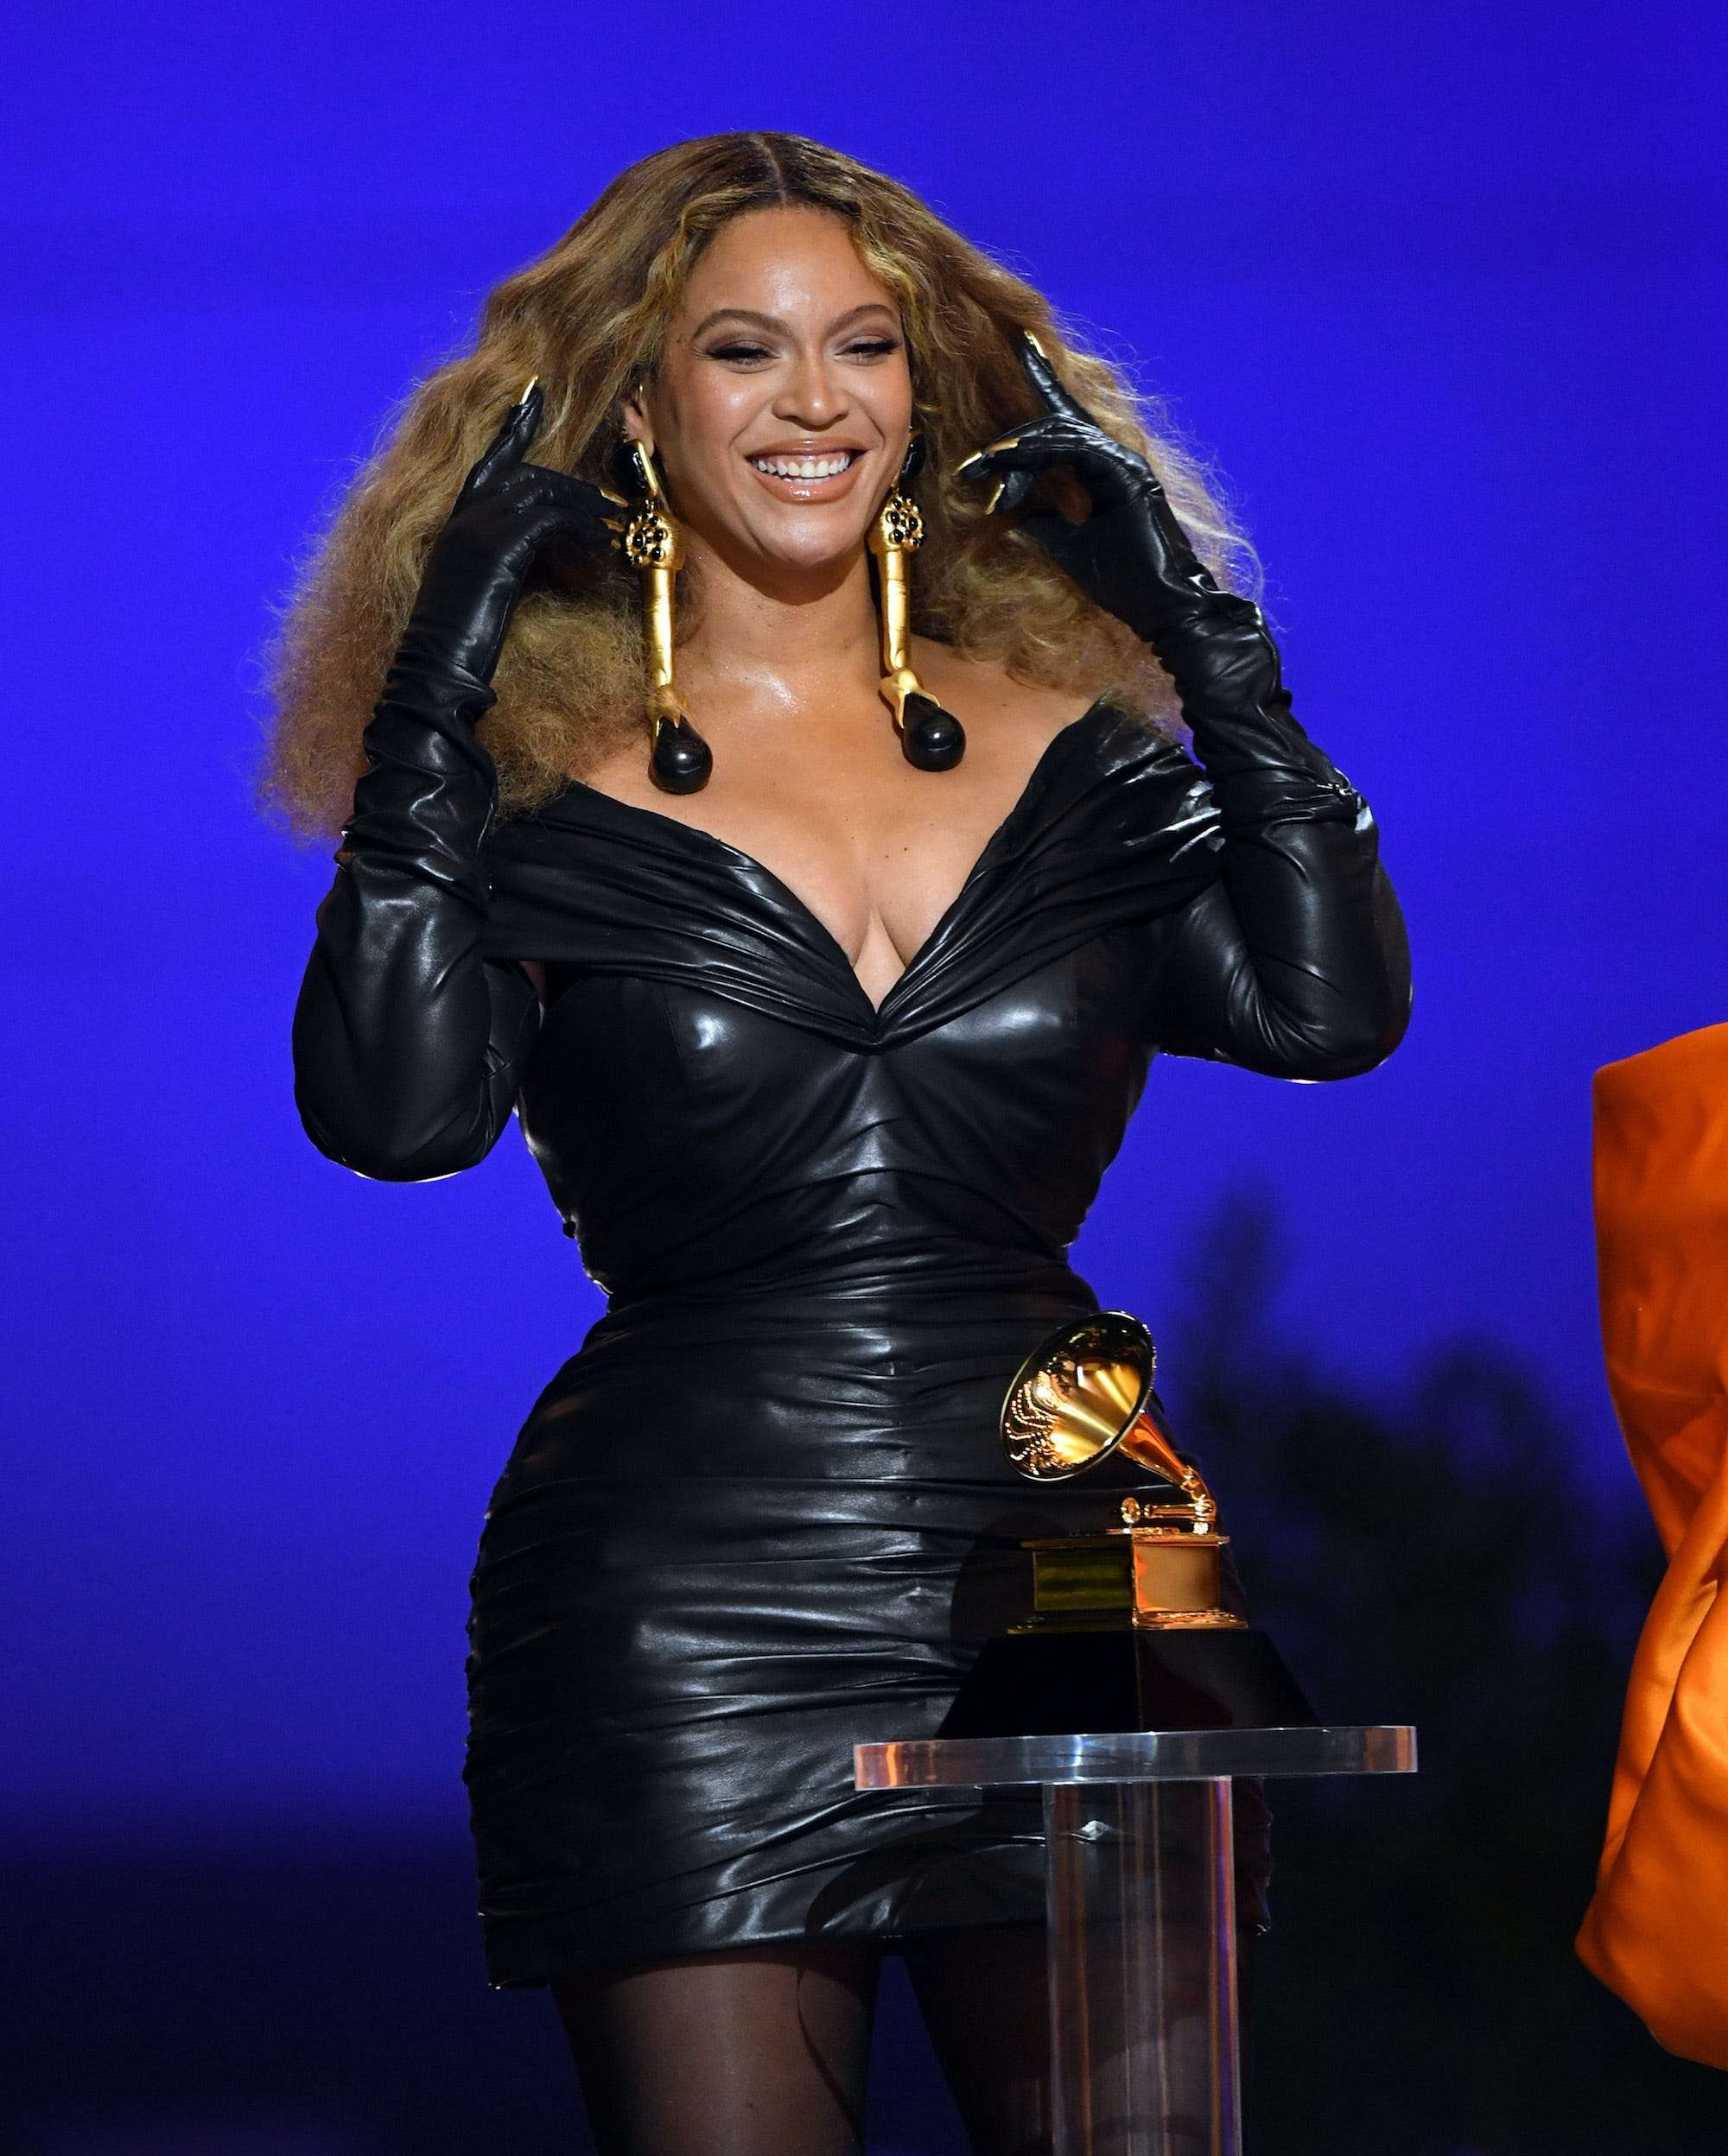 Beyoncé accepted her recordbreaking Grammys wearing a formfitting